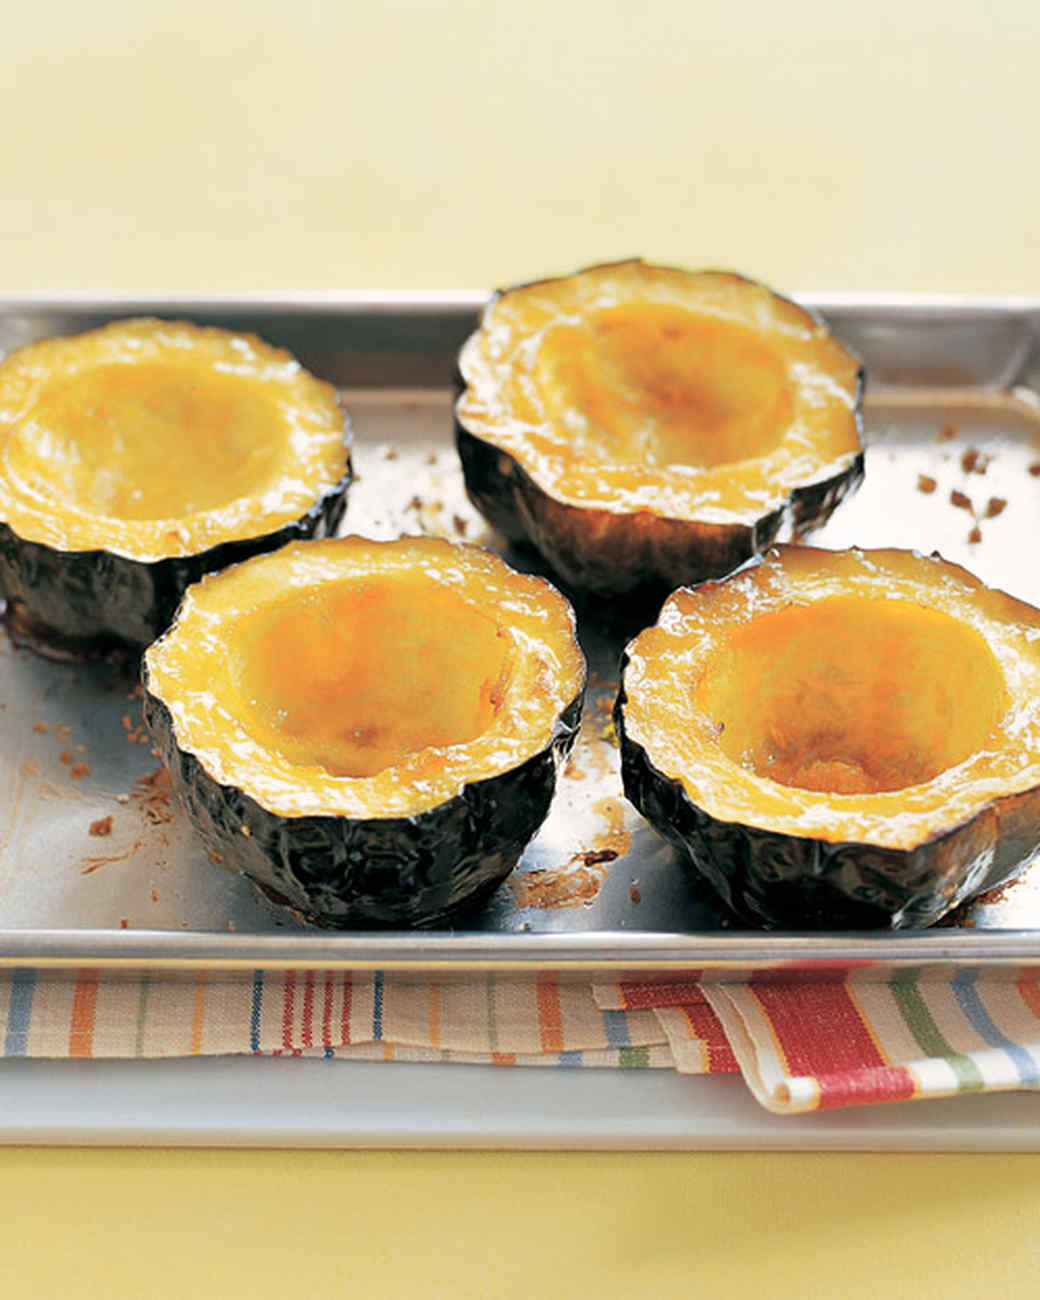 Baked Acorn Squash with Brown Sugar